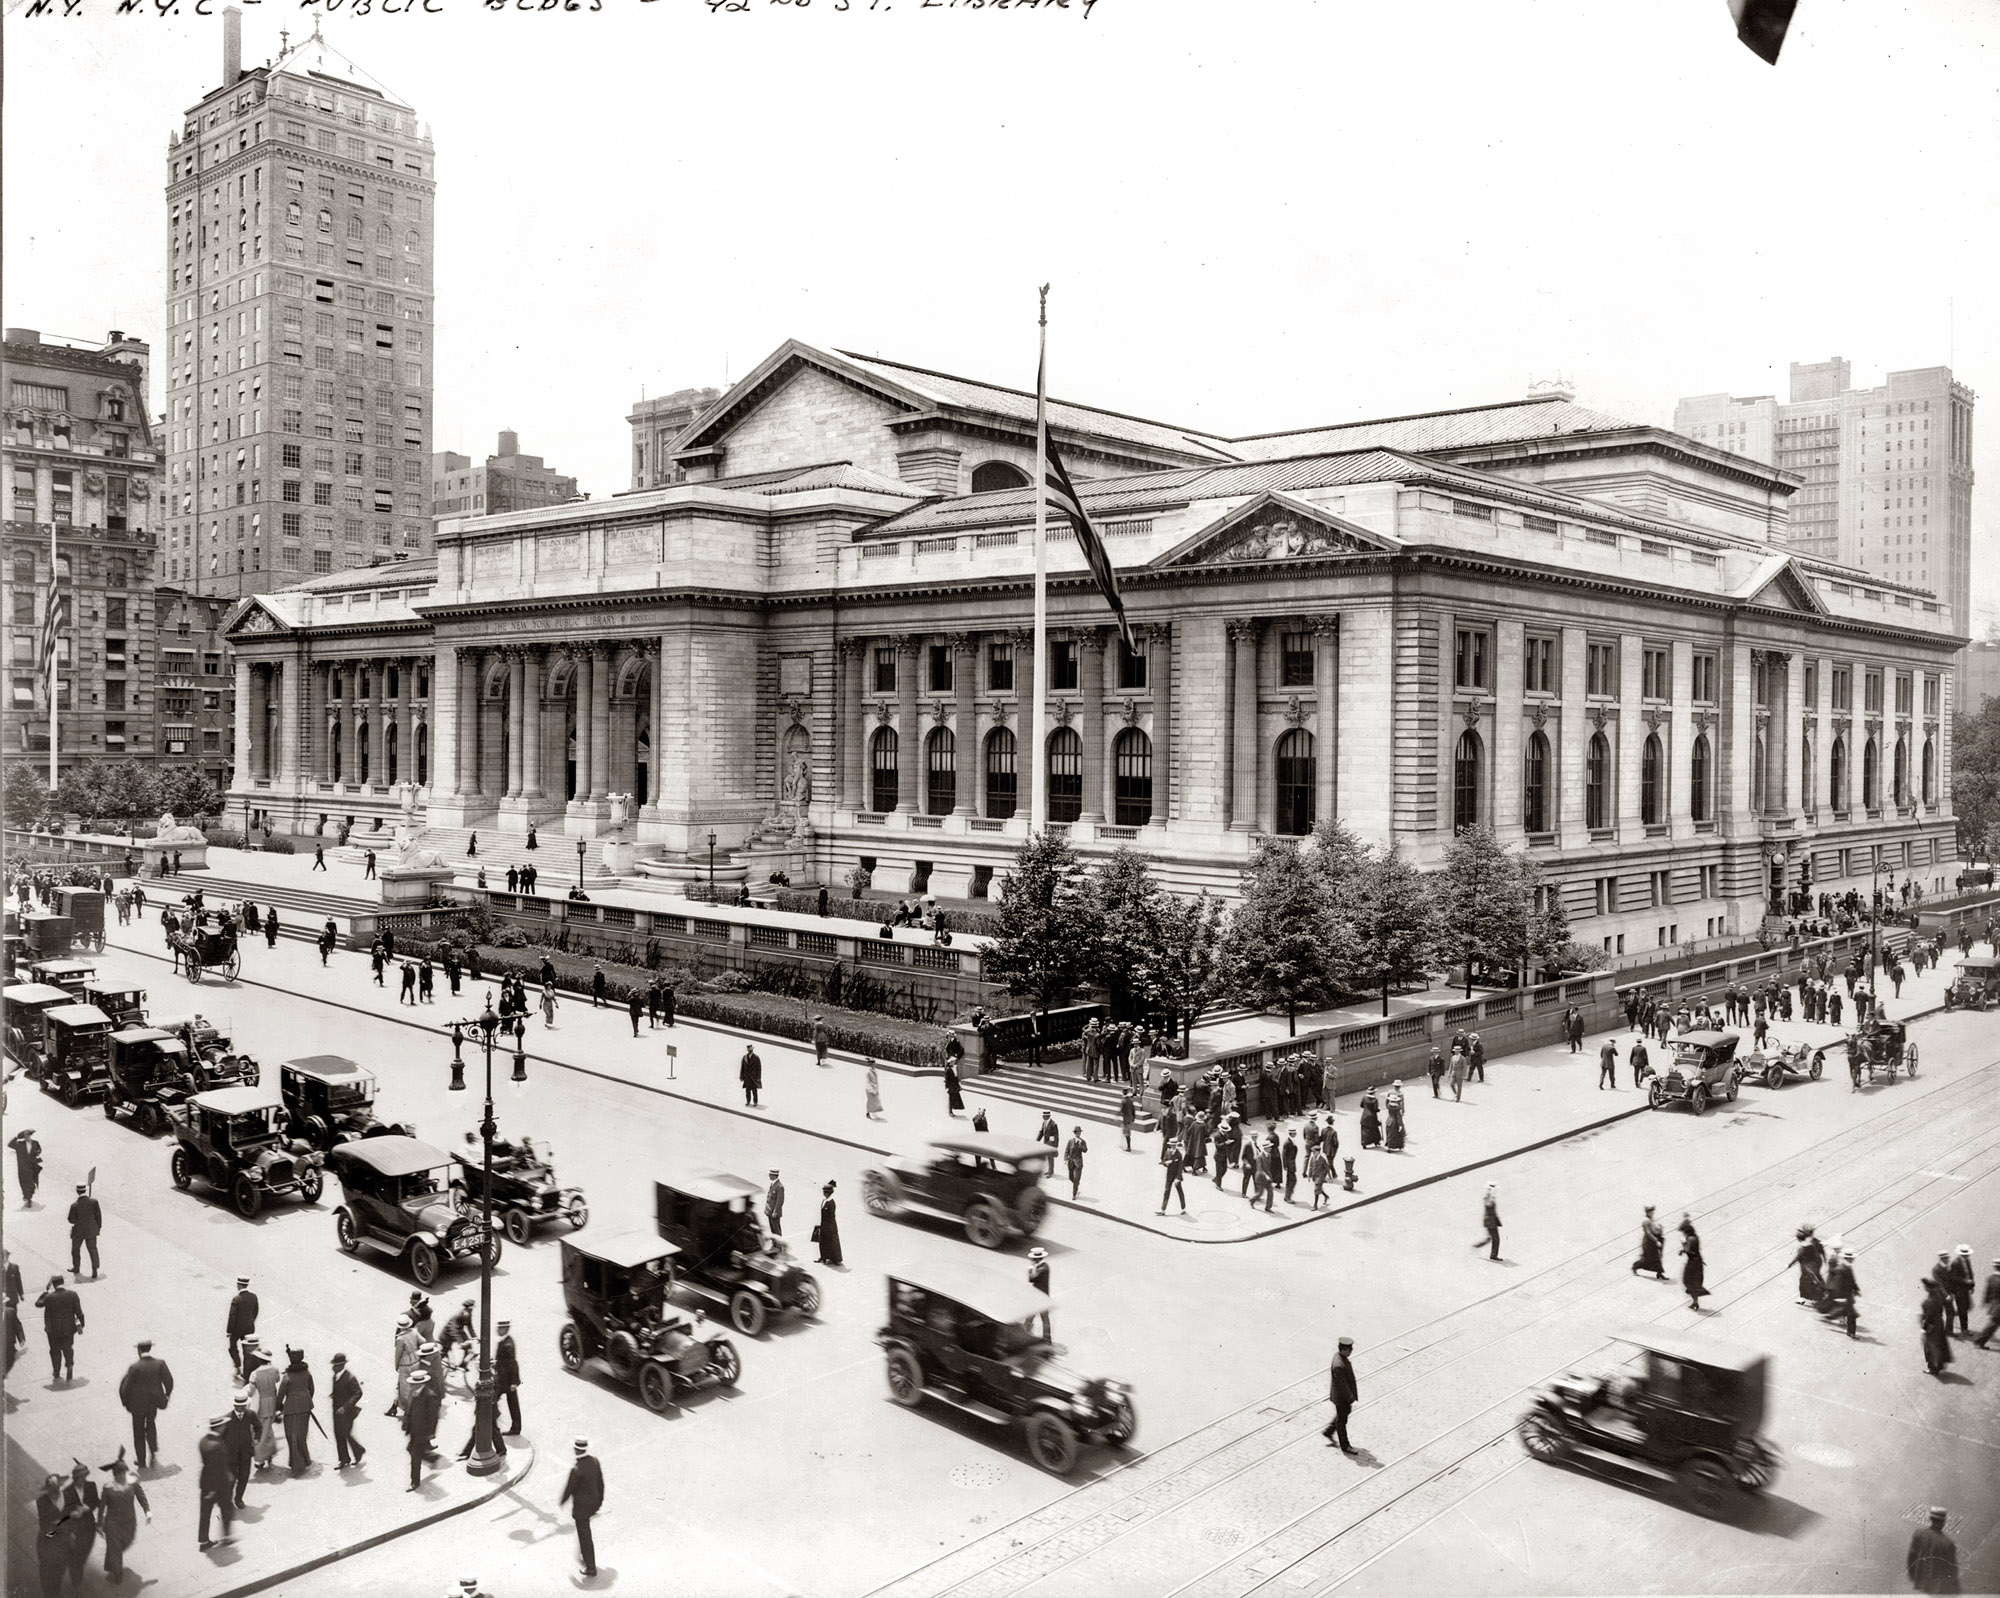 The New York Public Library as seen from the intersection of East 42nd Street and Fifth Avenue. July 14, 1915. Copyright Office Collection. View full size.